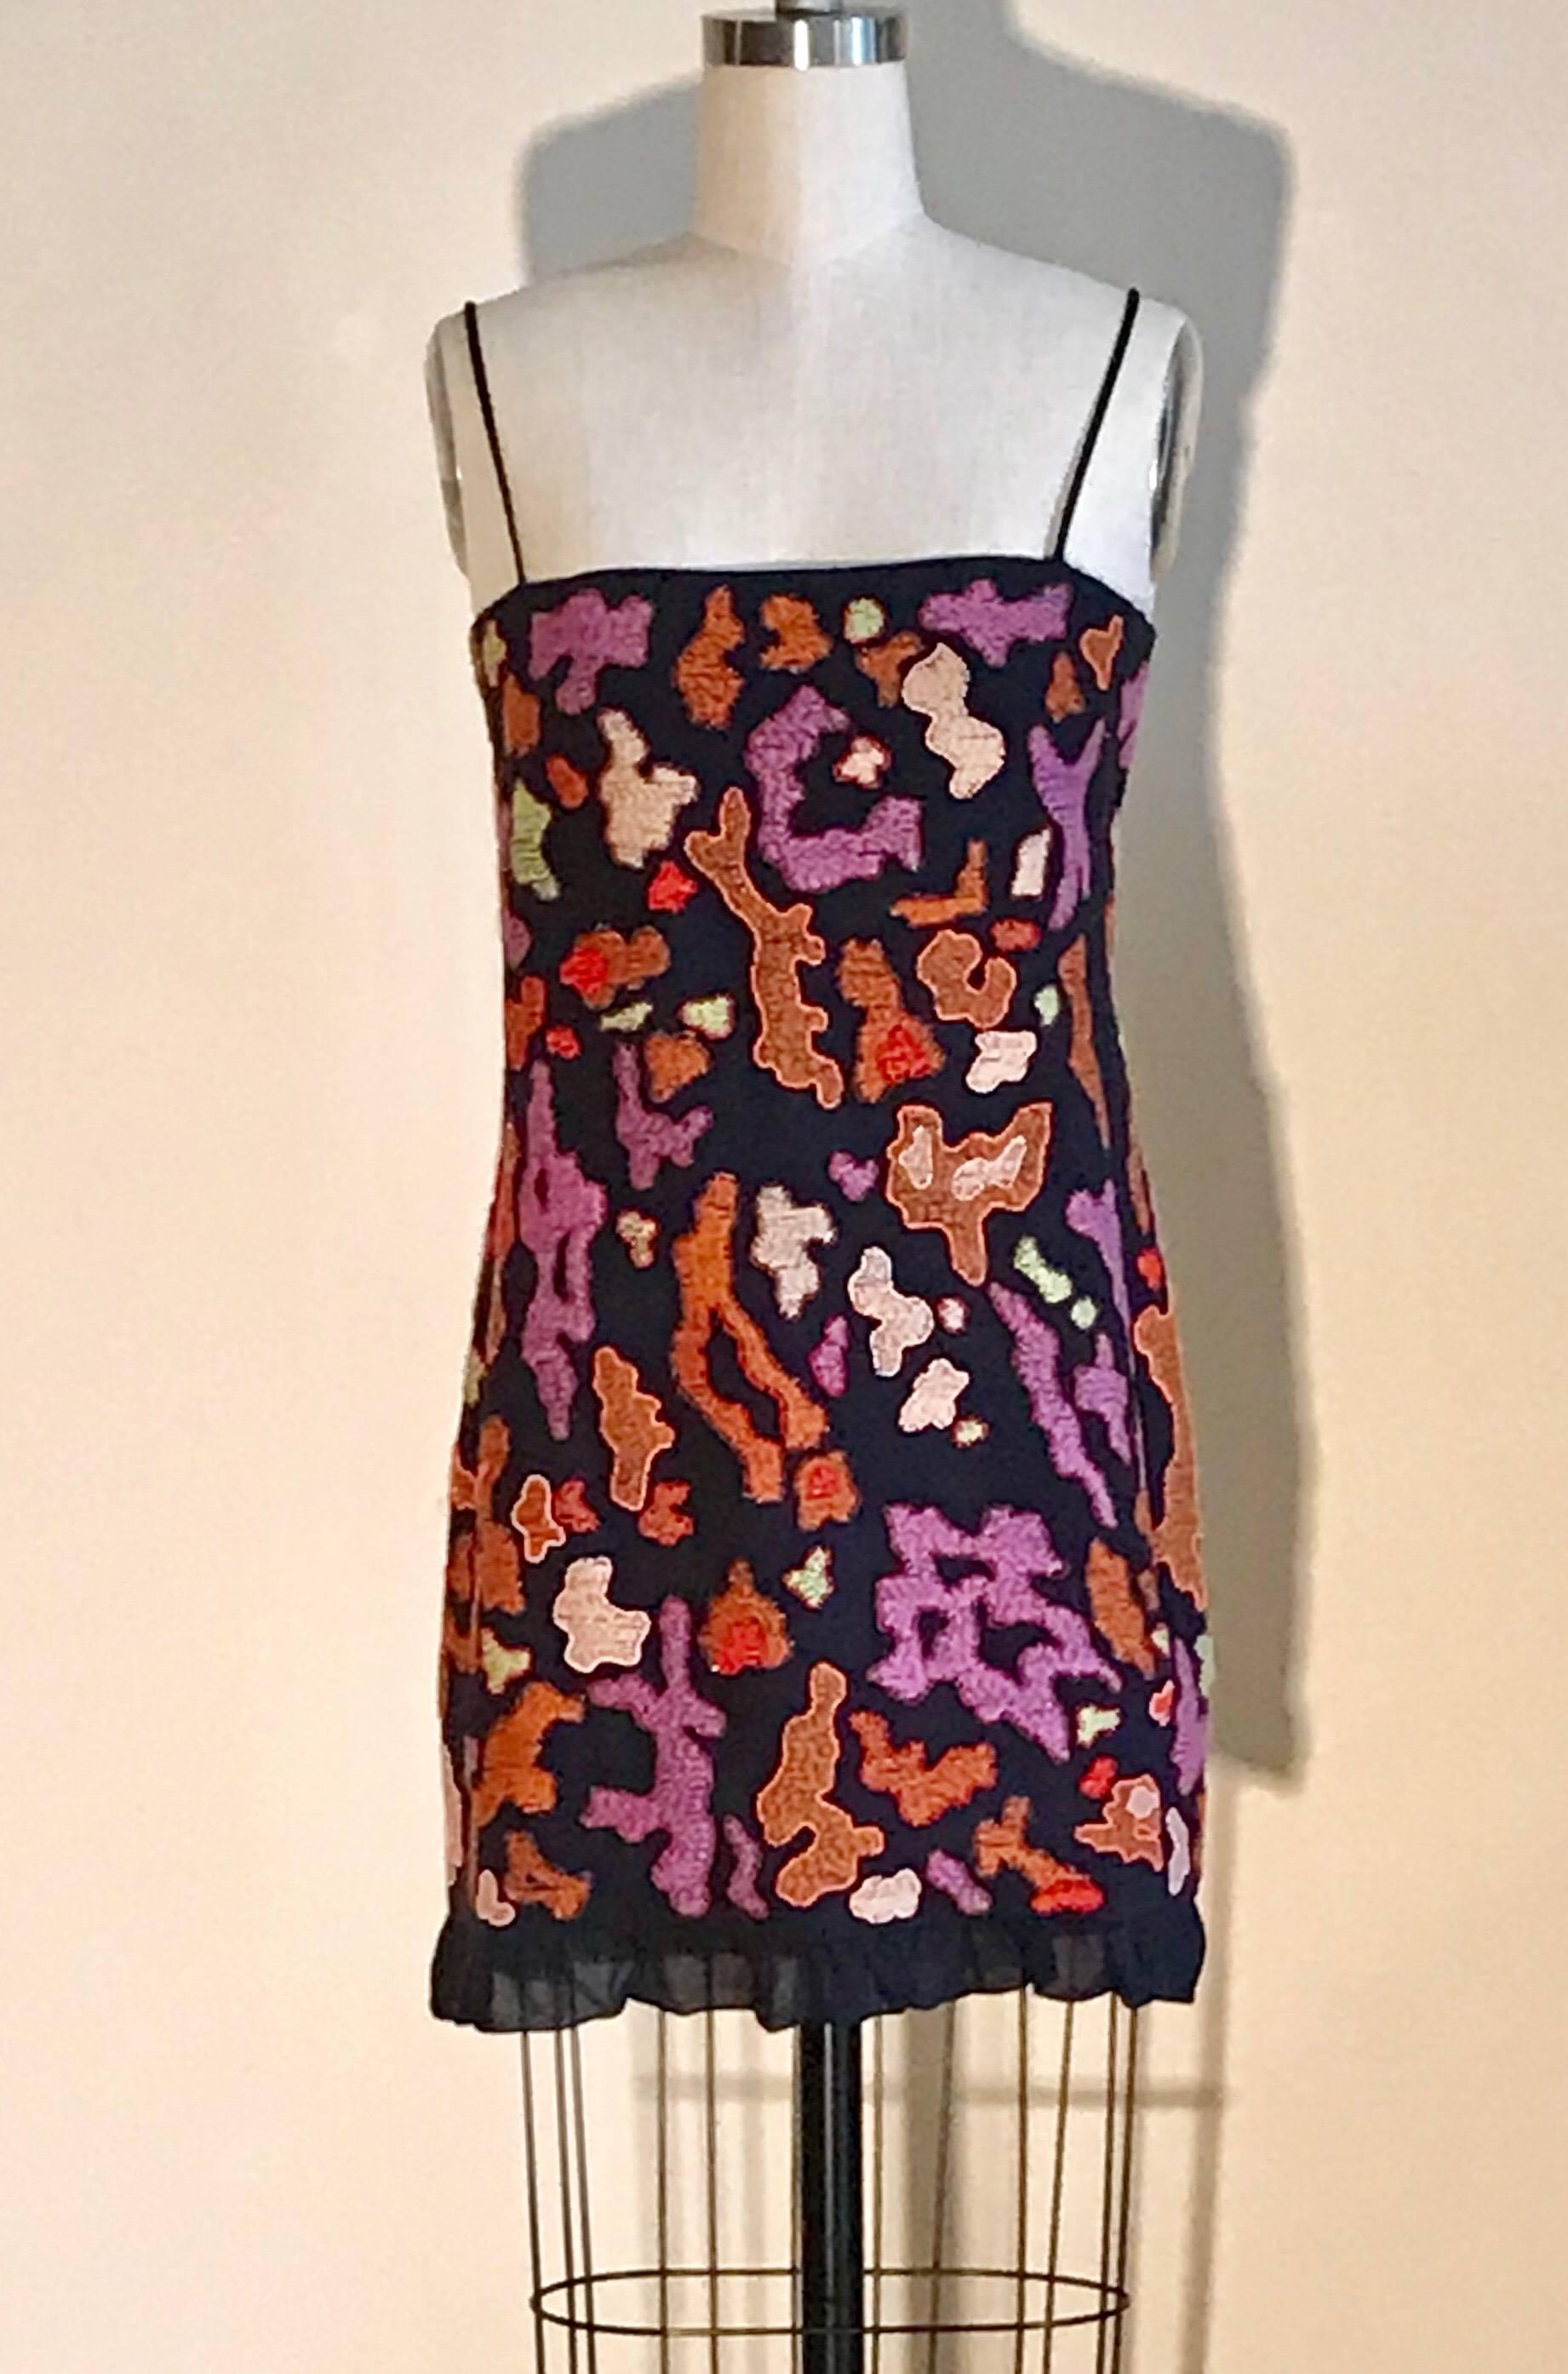 Chanel 1997 little black dress with a wild print from the Chanel Boutique collection. Mini length with spaghetti straps. Orange, purple, and green stitched patterns throughout with beaded borders. Chiffon ruffle at bottom. Back zip and hook and eye.